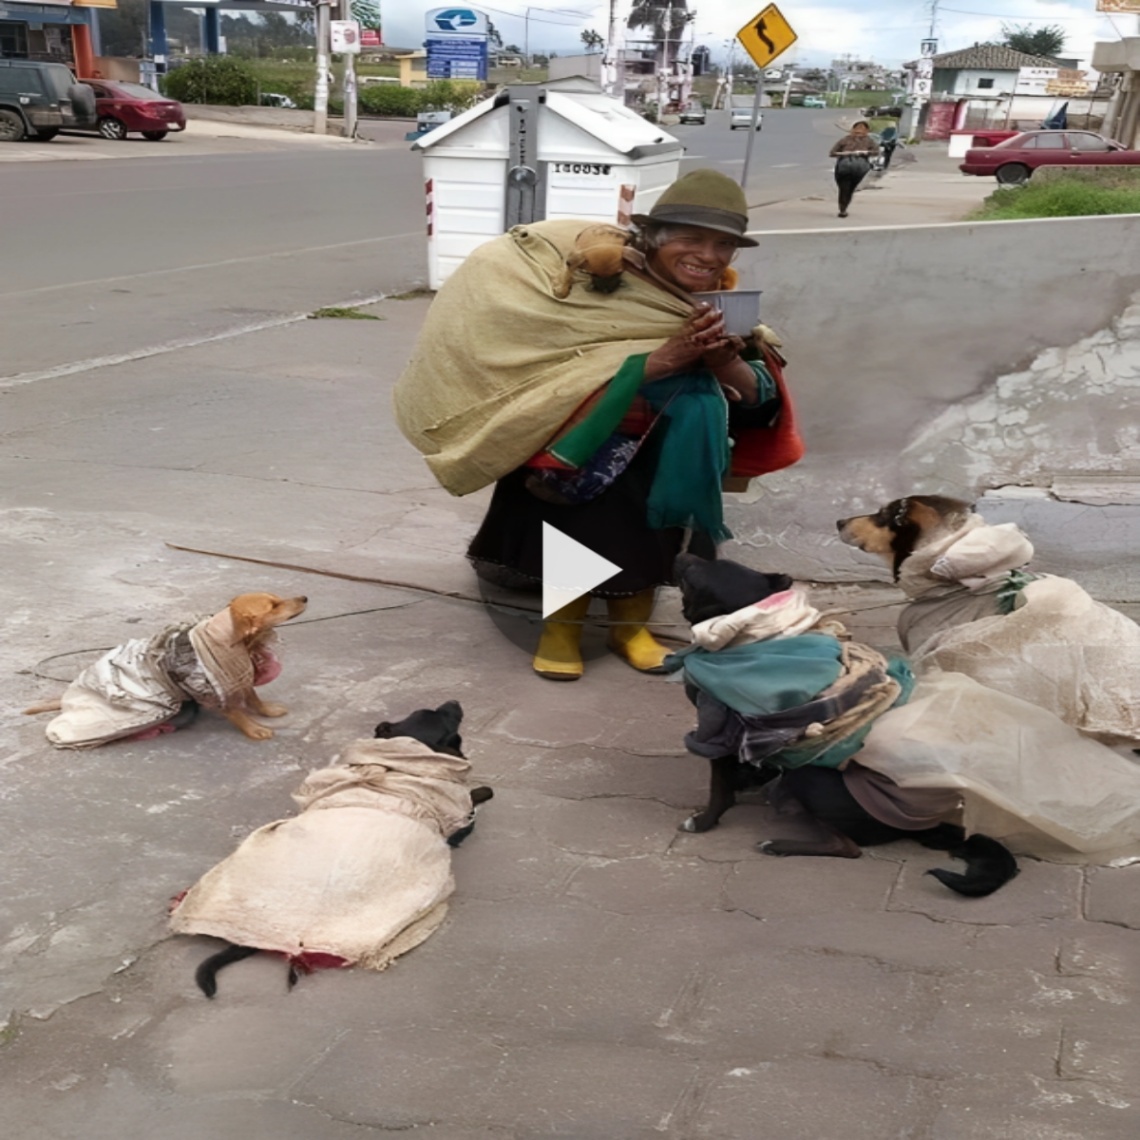 In her hard life, the devoted dogs support their impoverished owner by helping her gather bottles. (Video)